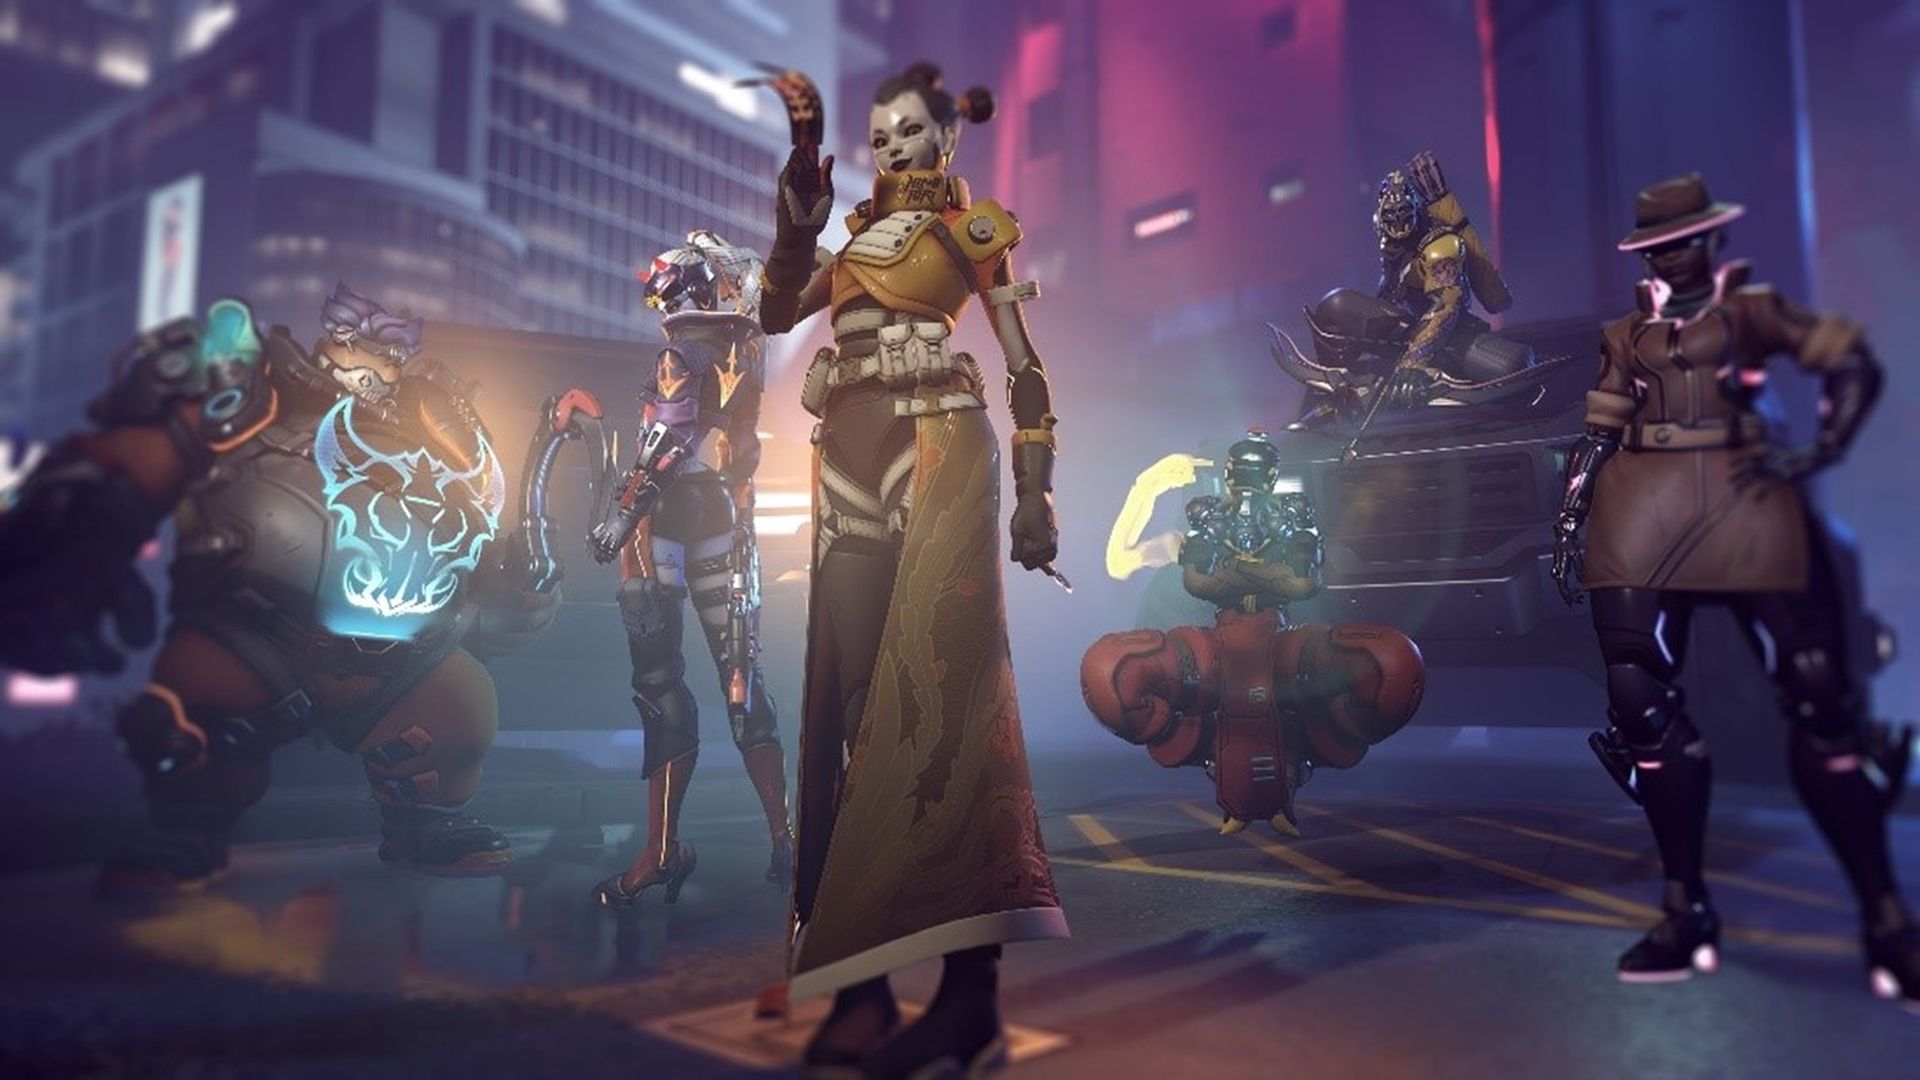 In this article, we are going to be covering the best Overwatch 2 settings to improve performance and quality, so you can enjoy the game to the fullest.